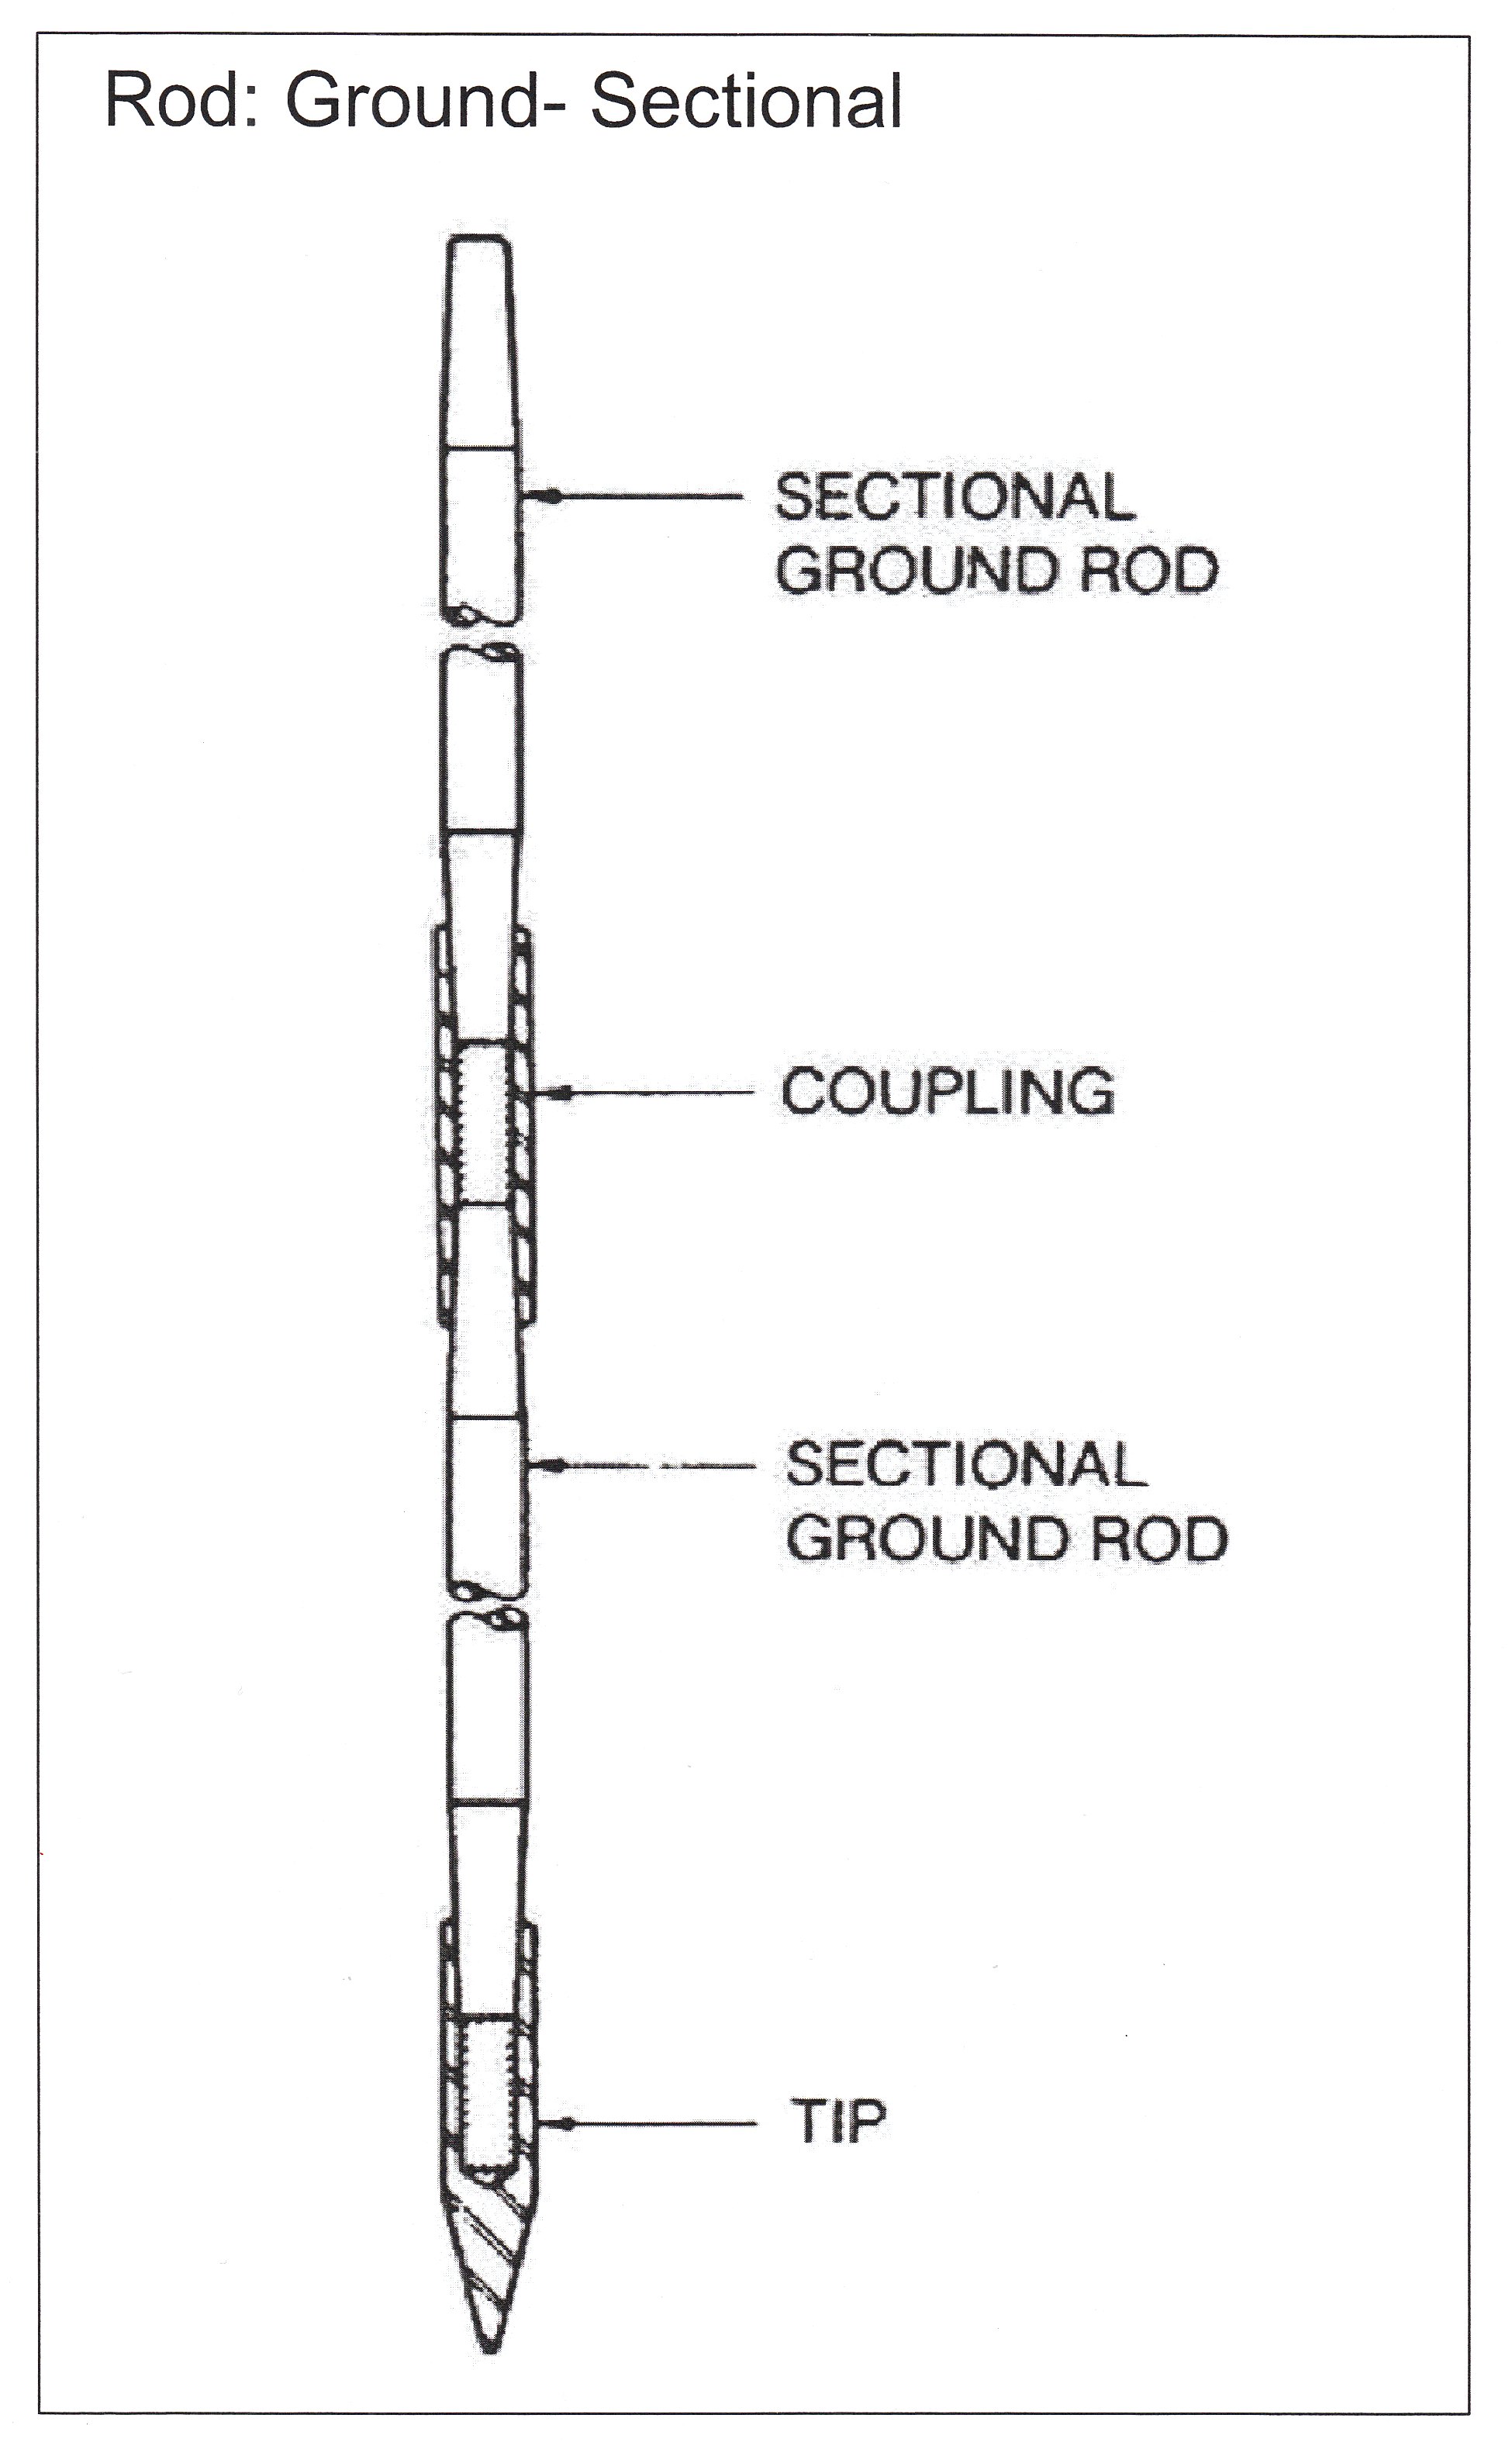 ROD GROUND SECTIONAL PAGE 1-25-2.jpg